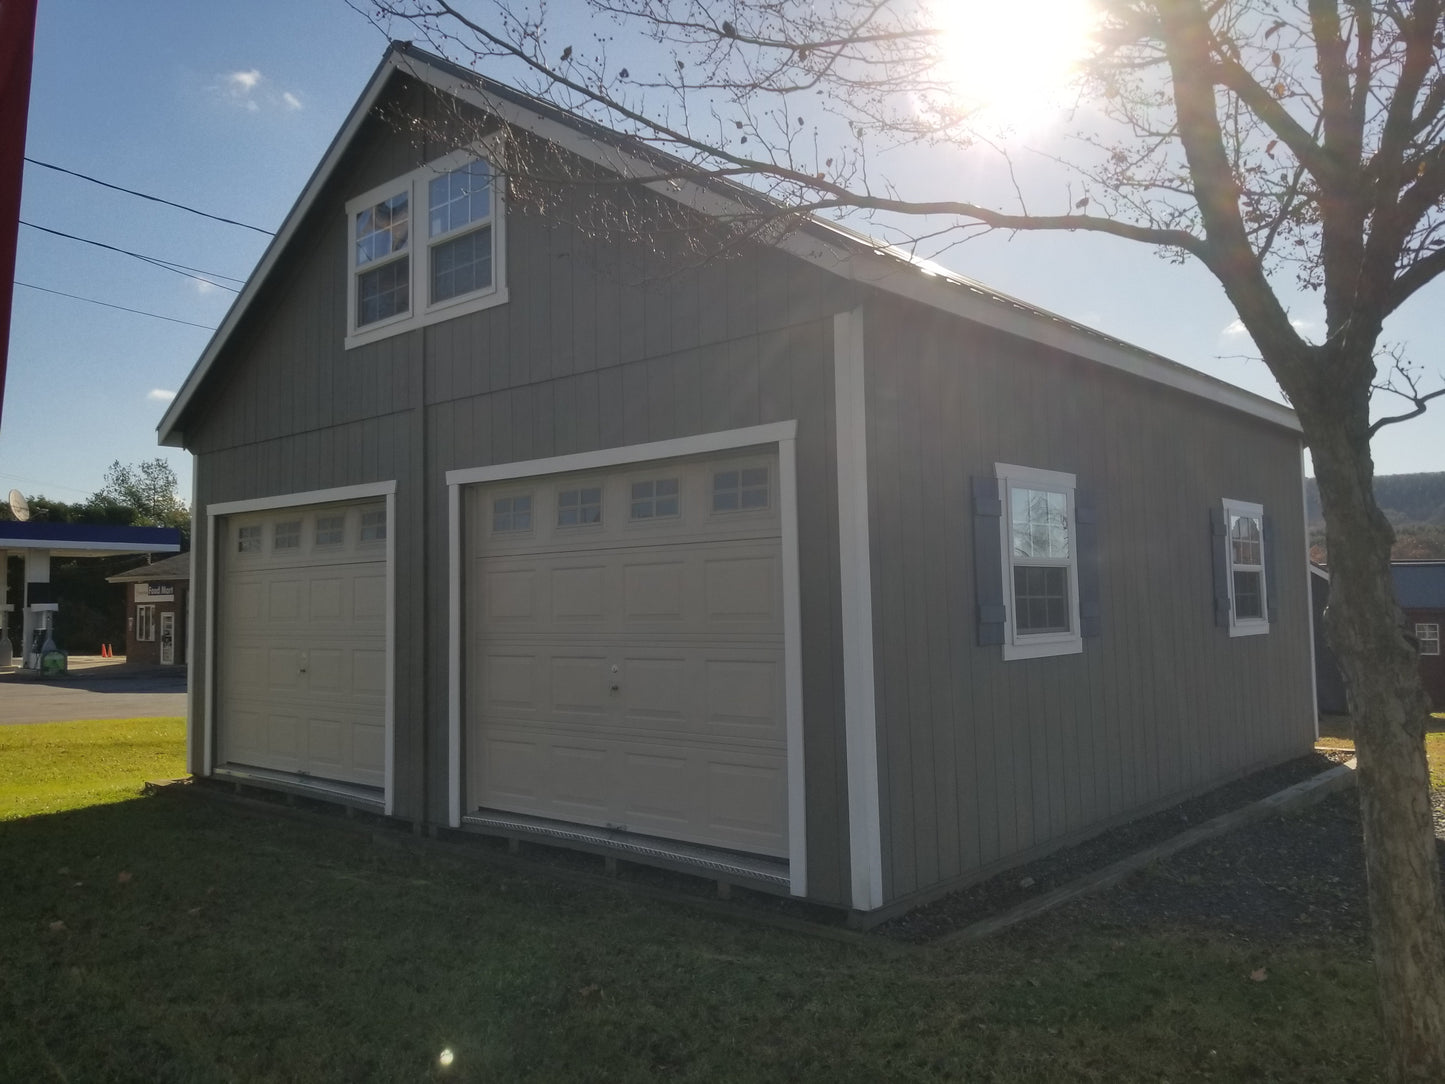 24x24 Two Story Garden Shed Garage with SmartTec Siding